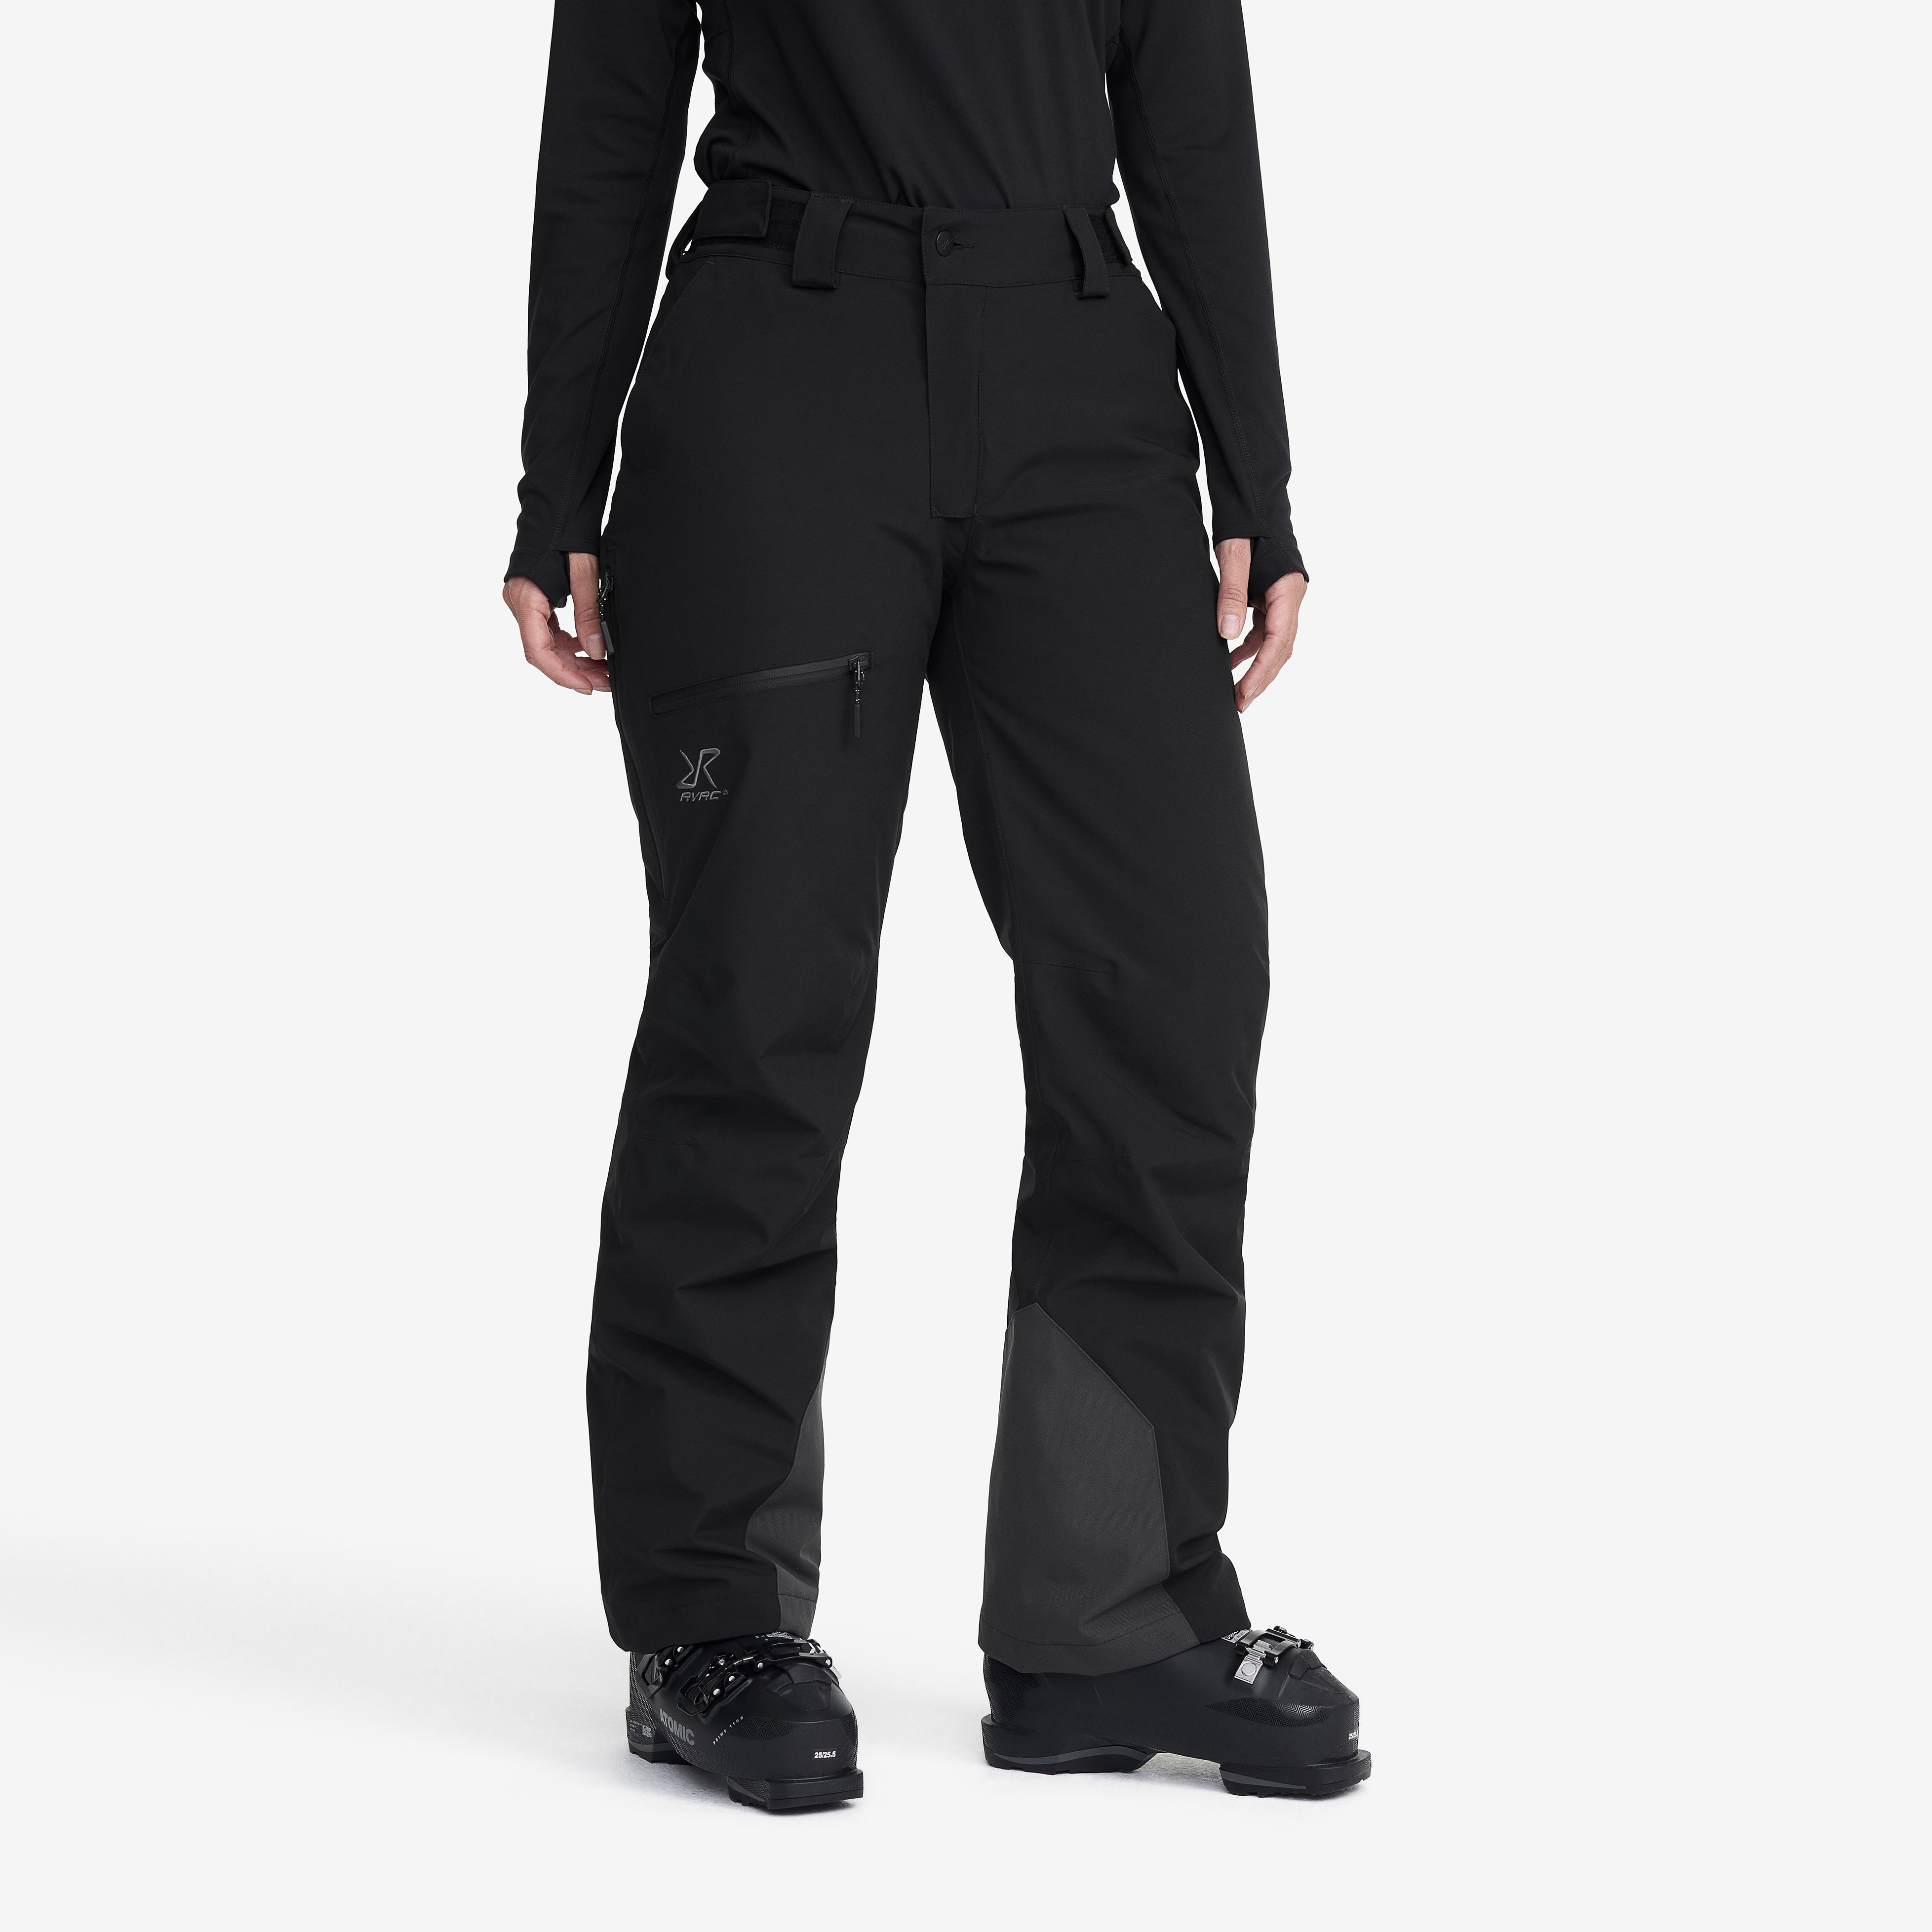 Halo 2L Insulated Snow Pants Black Femme